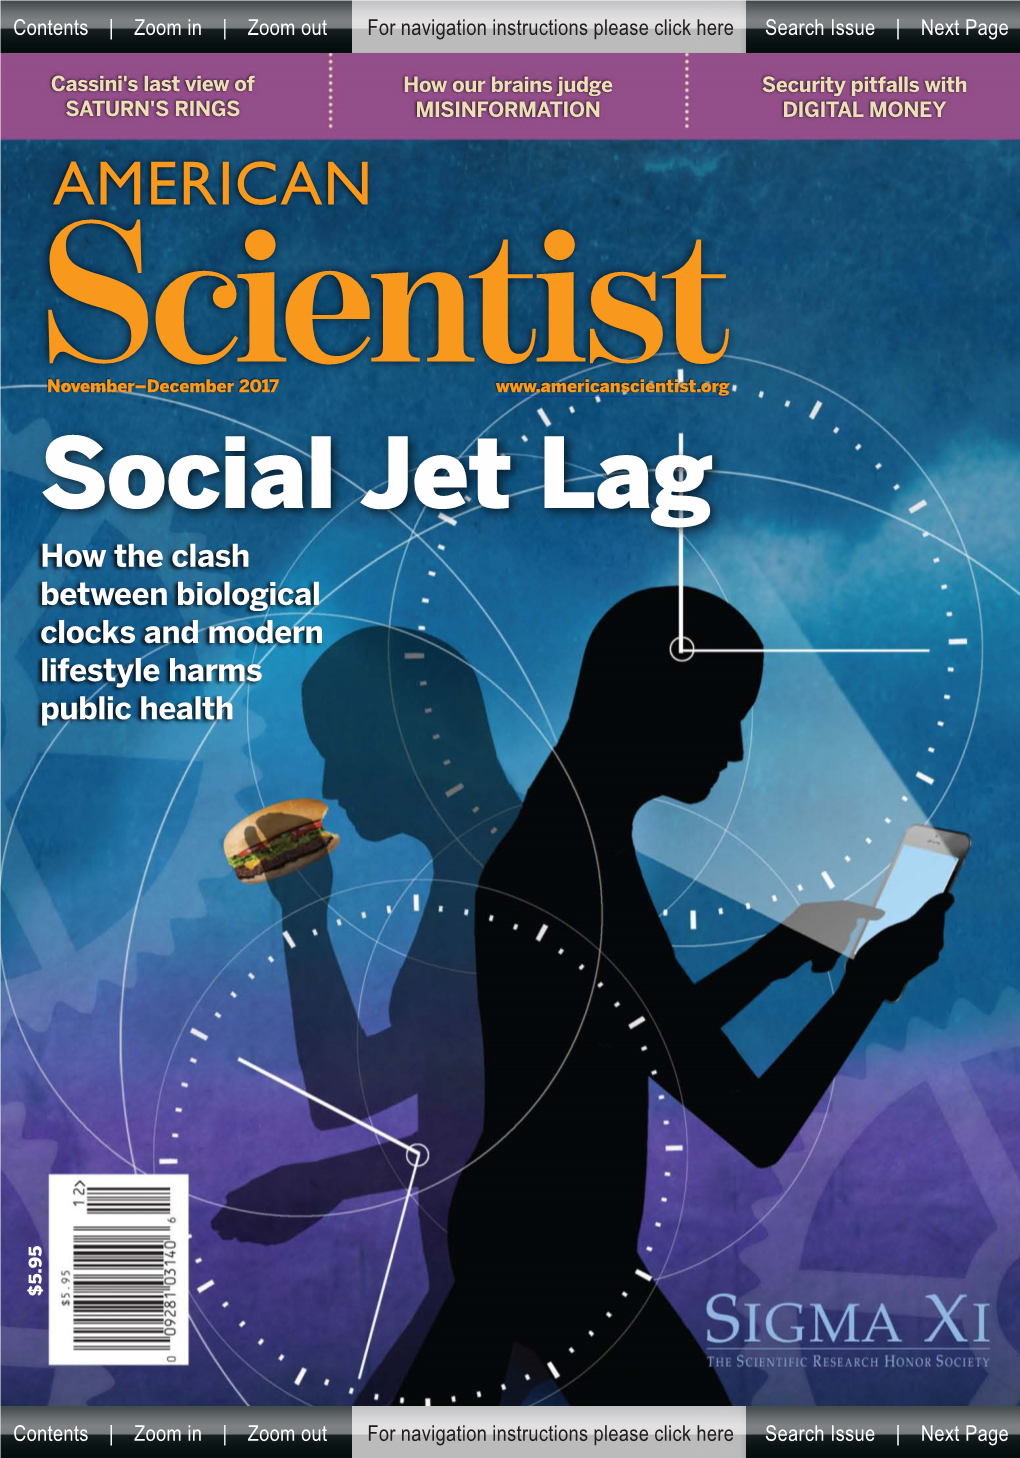 Social Jet Lag, When Our Body Rhythms Are out of Sync with the Day-Night Cycle